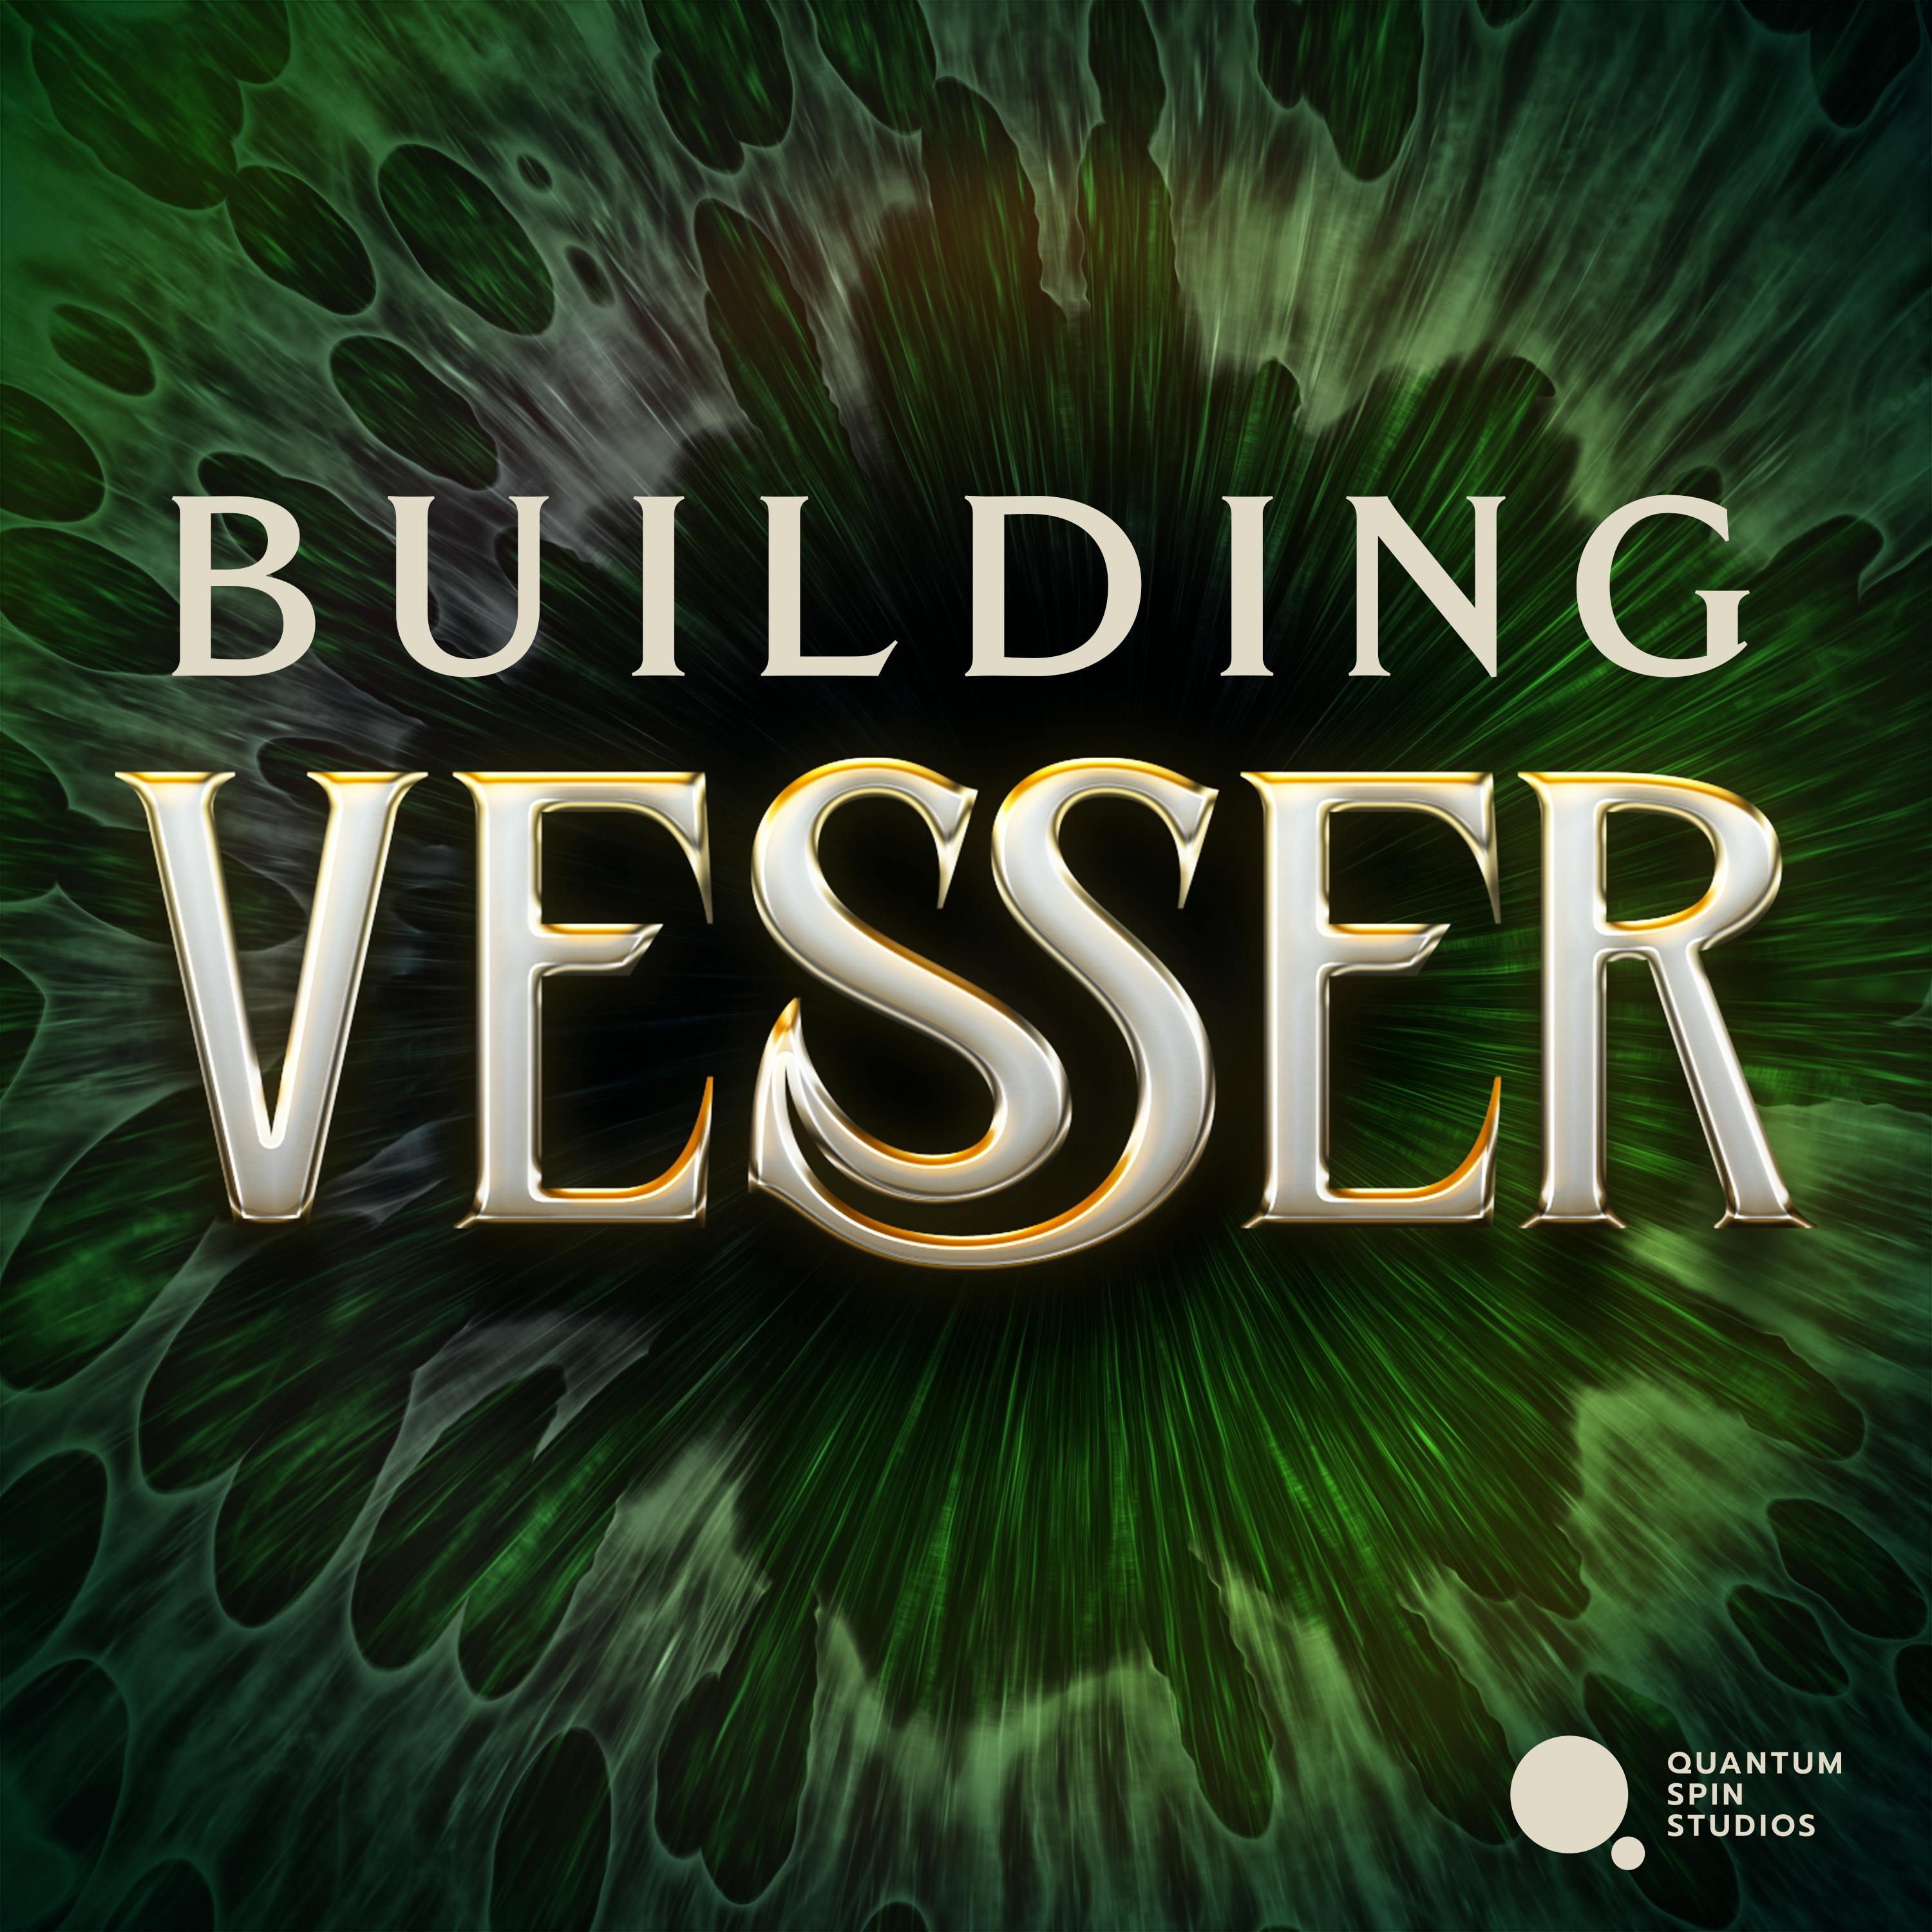 Building Vesser: The 24 Exalted, Continuity, and Baldur's Gate 3